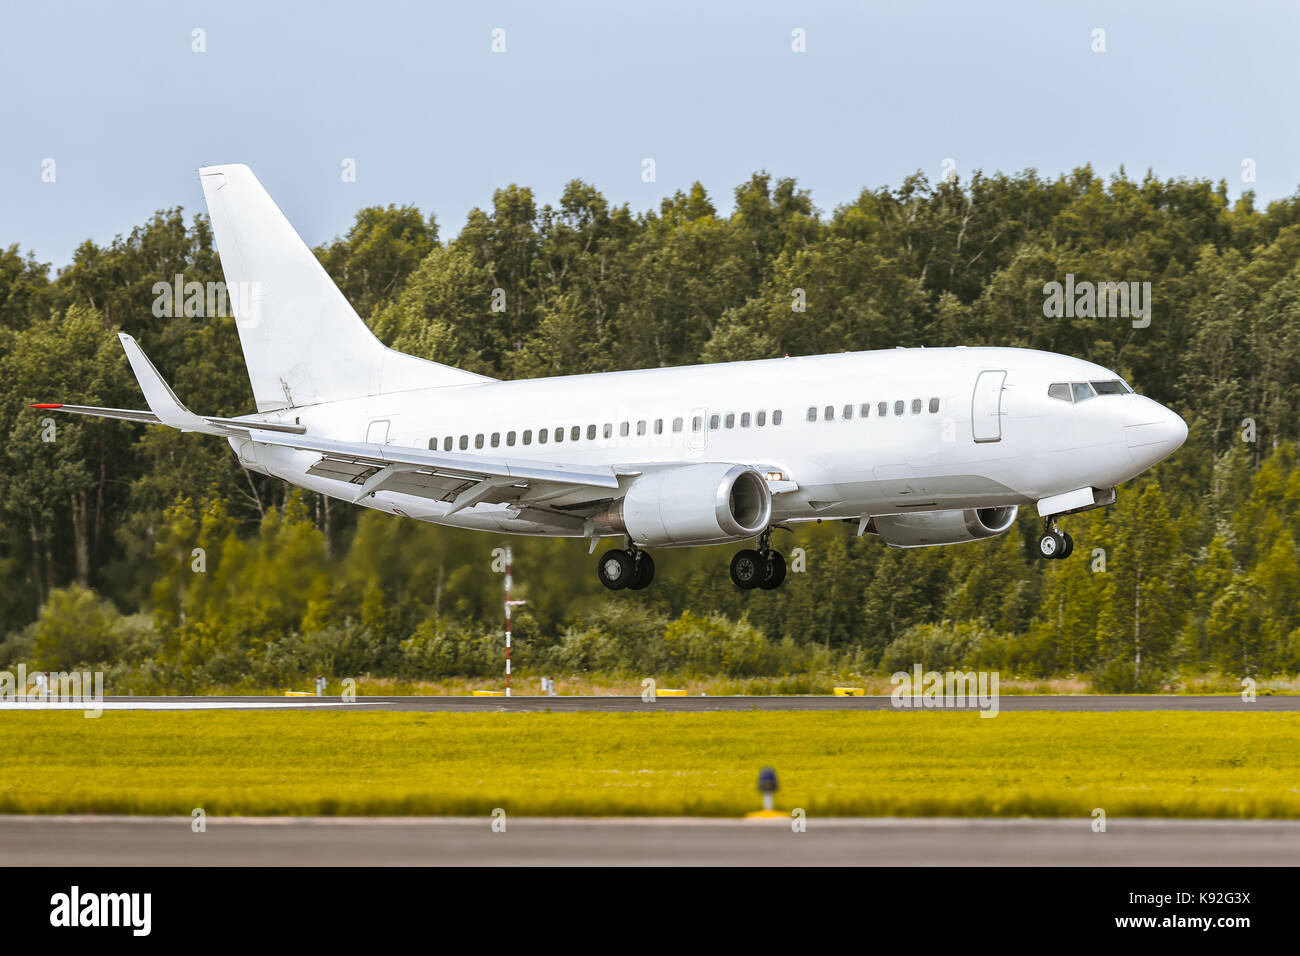 The airplane is landing on the runway at airport against the background of the forest and blue sky. Summer sunny weather Stock Photo